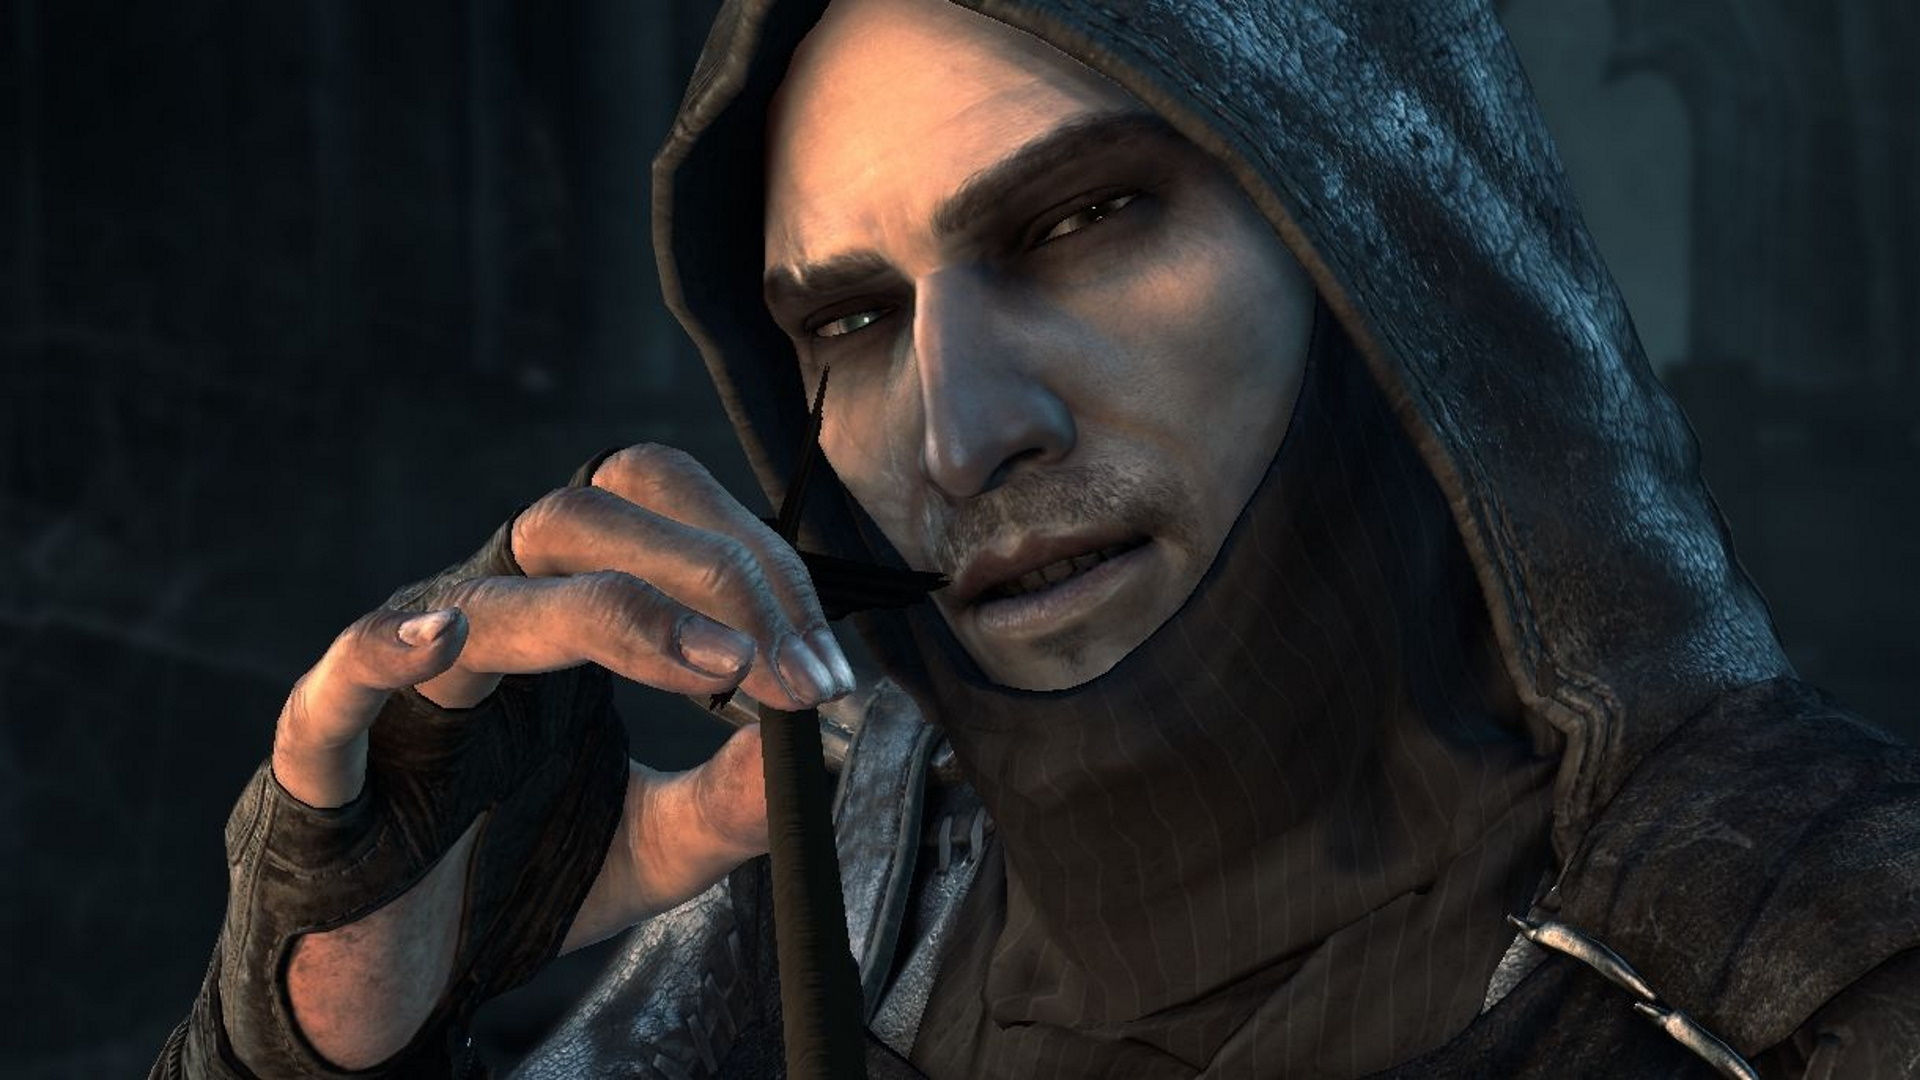 Thief 2 prototype is an enticing look at the action game’s early days